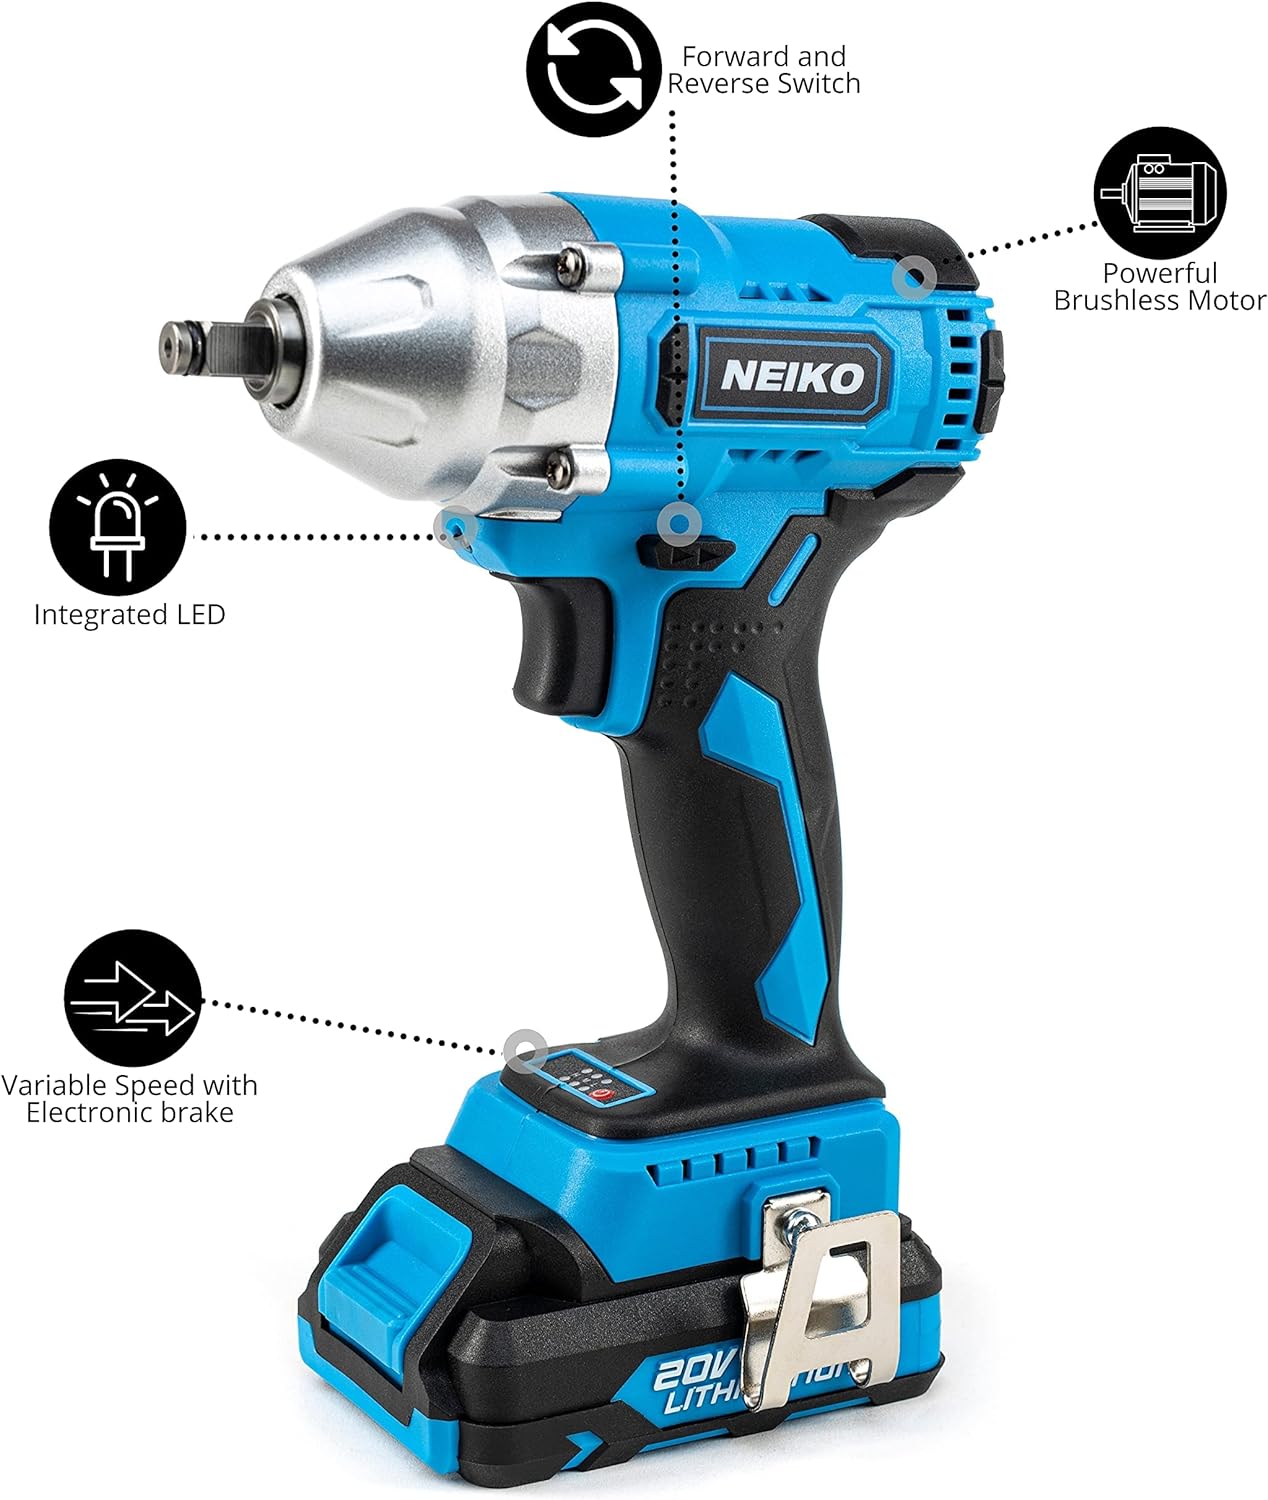 NEIKO 10881A Cordless Angle Grinder, 4 1/2-Inch Grinder with Variable Speed, 20V 4.0A Li-ion Rechargeable Battery, Powerful 8,000 rpm Brushless Motor, Grinders Power Tools, Cordless Grinder Tool